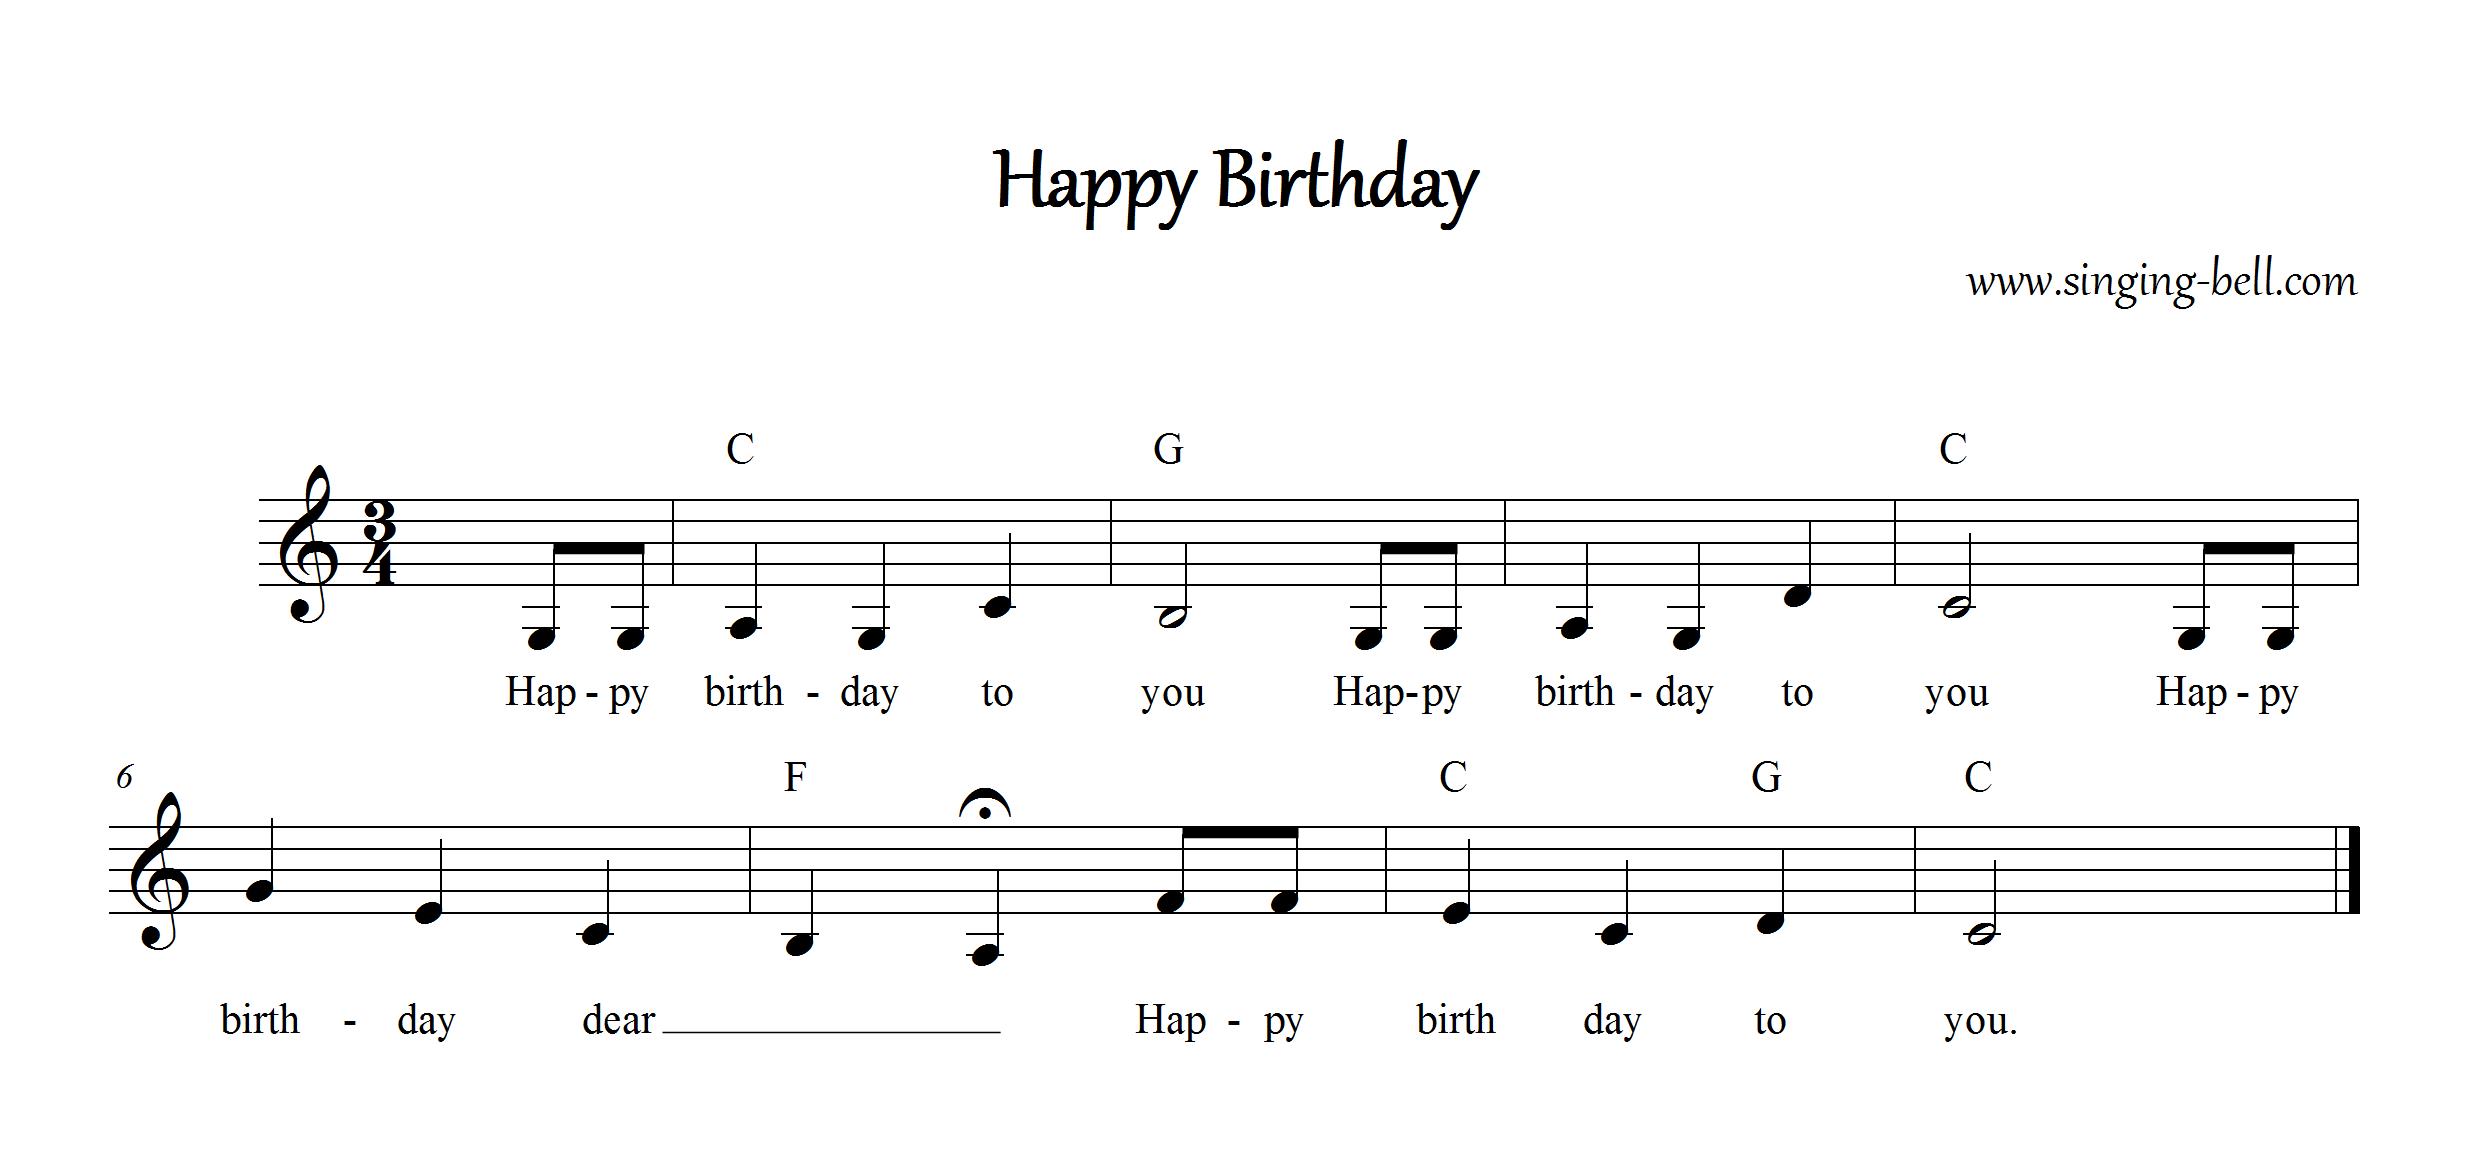 birthday song with lyrics and chords